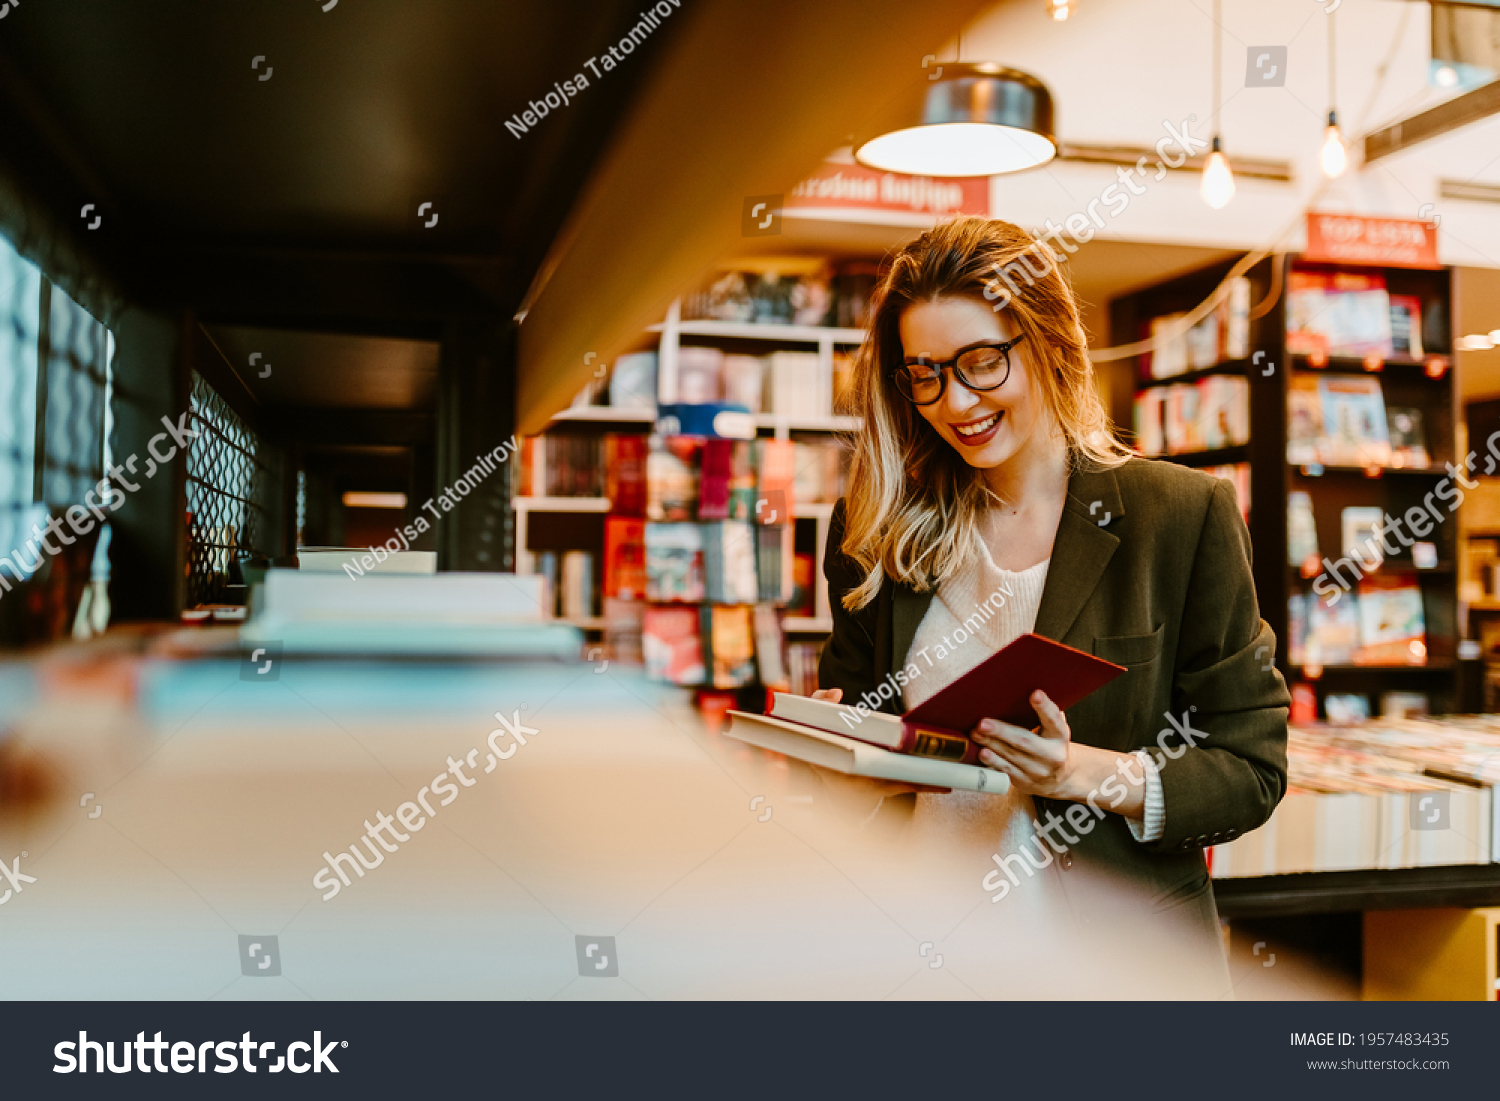 Photo of young woman reading impressum for book that she just grabbed from book shelf. Young woman is spending her free time at bookstore. #1957483435